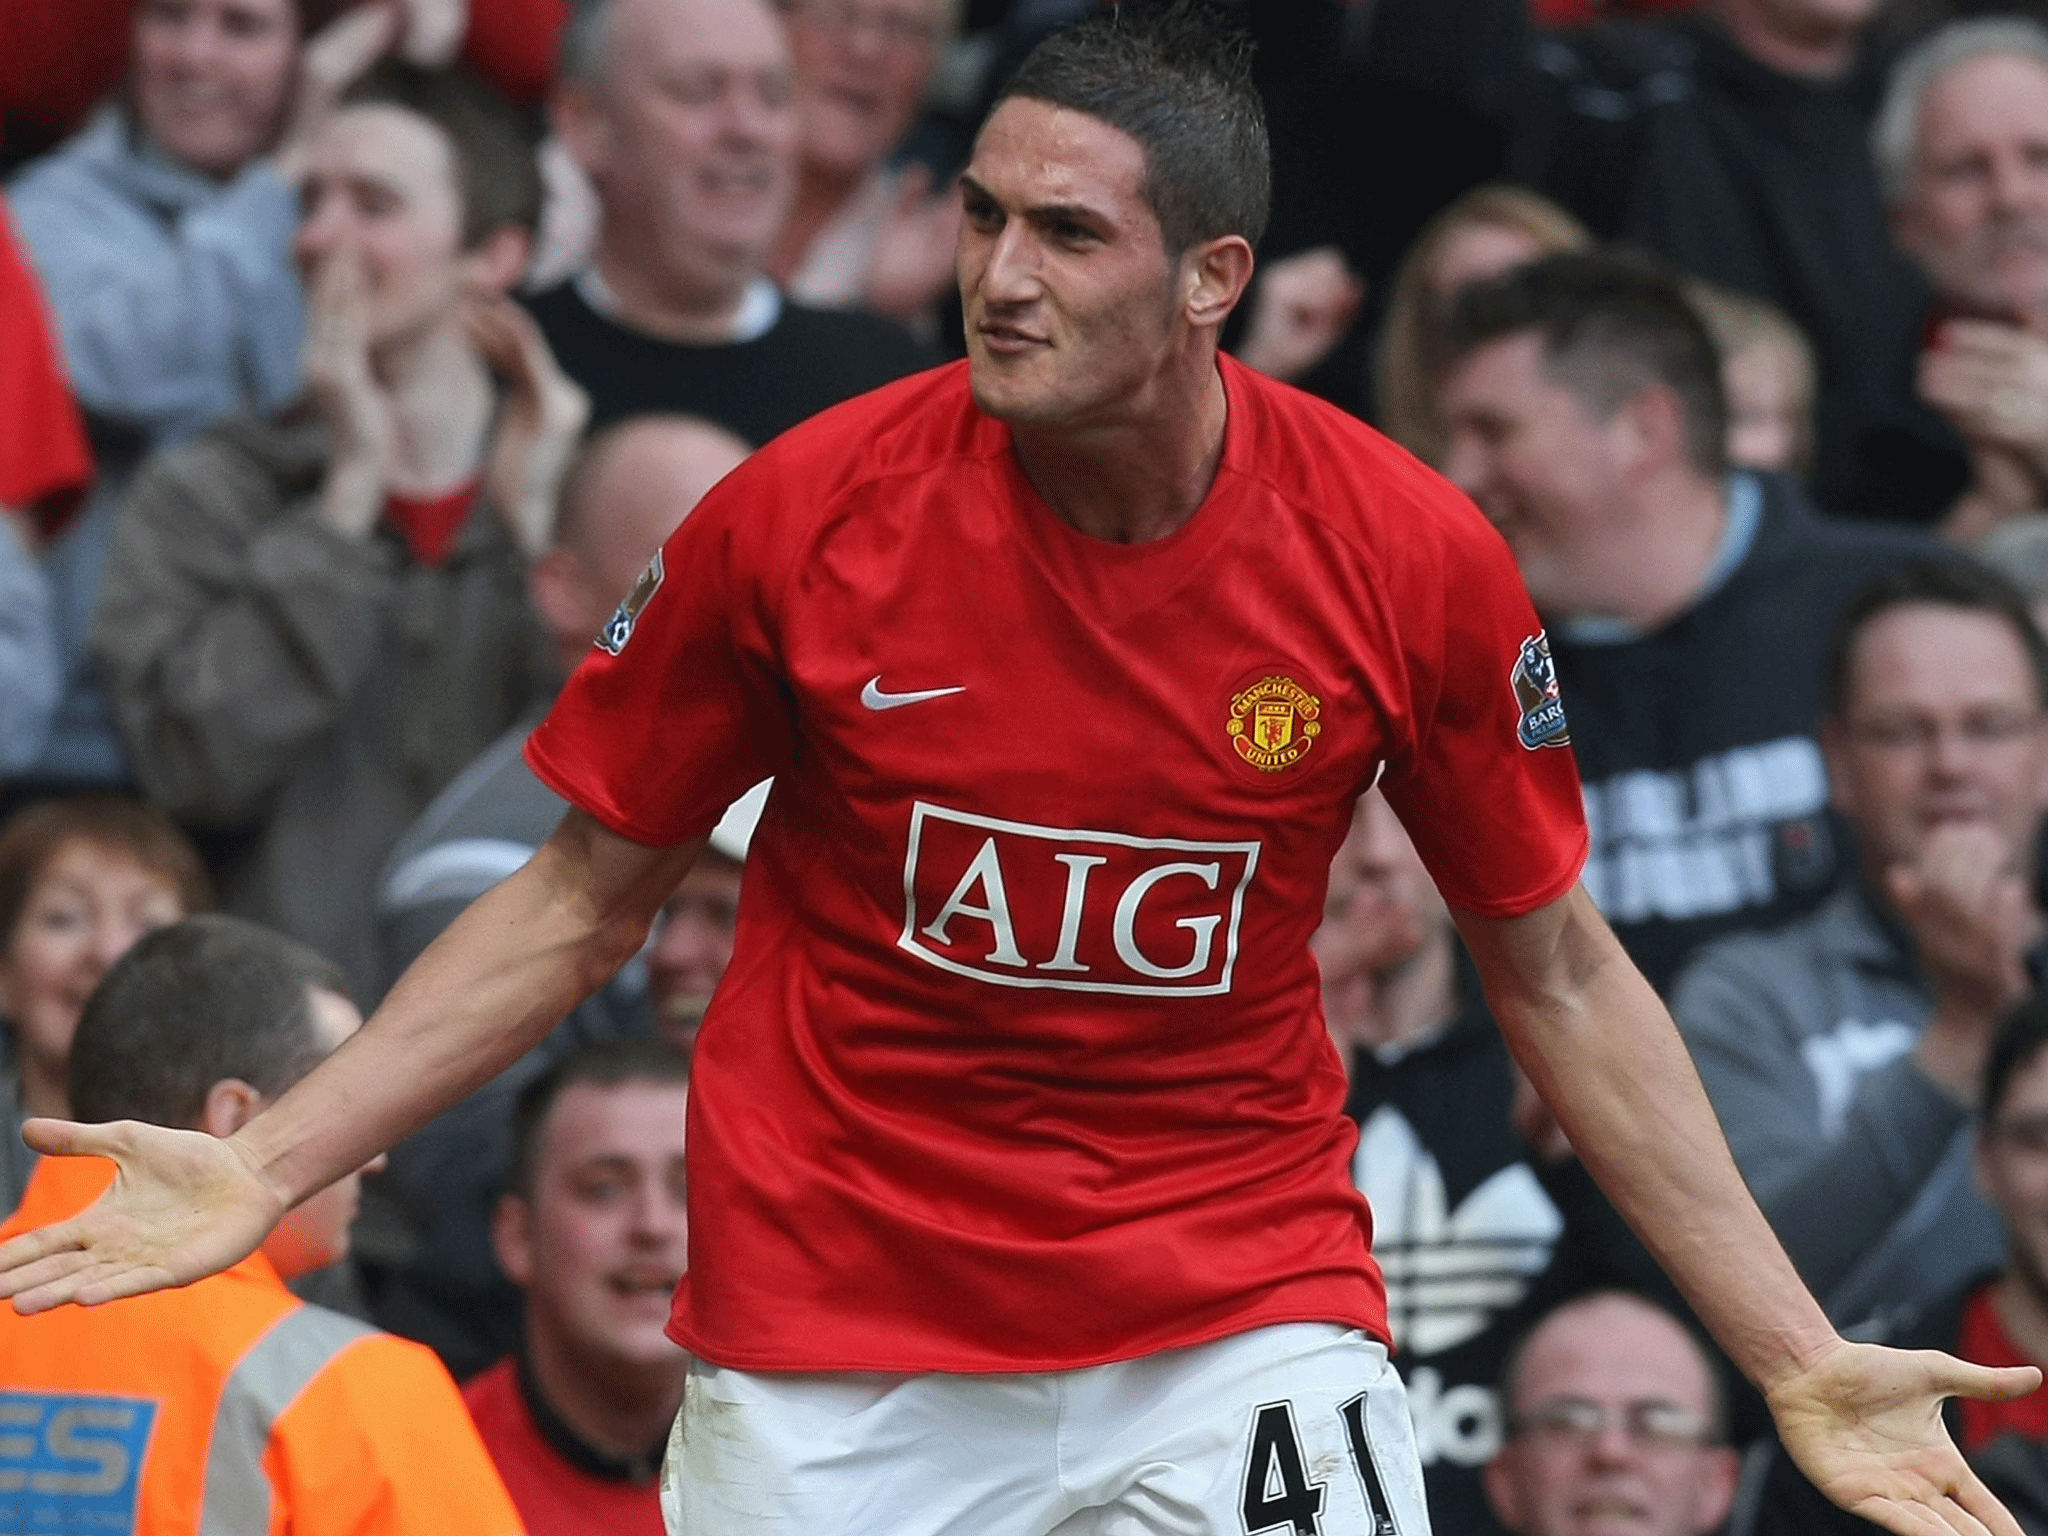 Federico Macheda is set to go out on the fourth loan spell of his Manchester United career